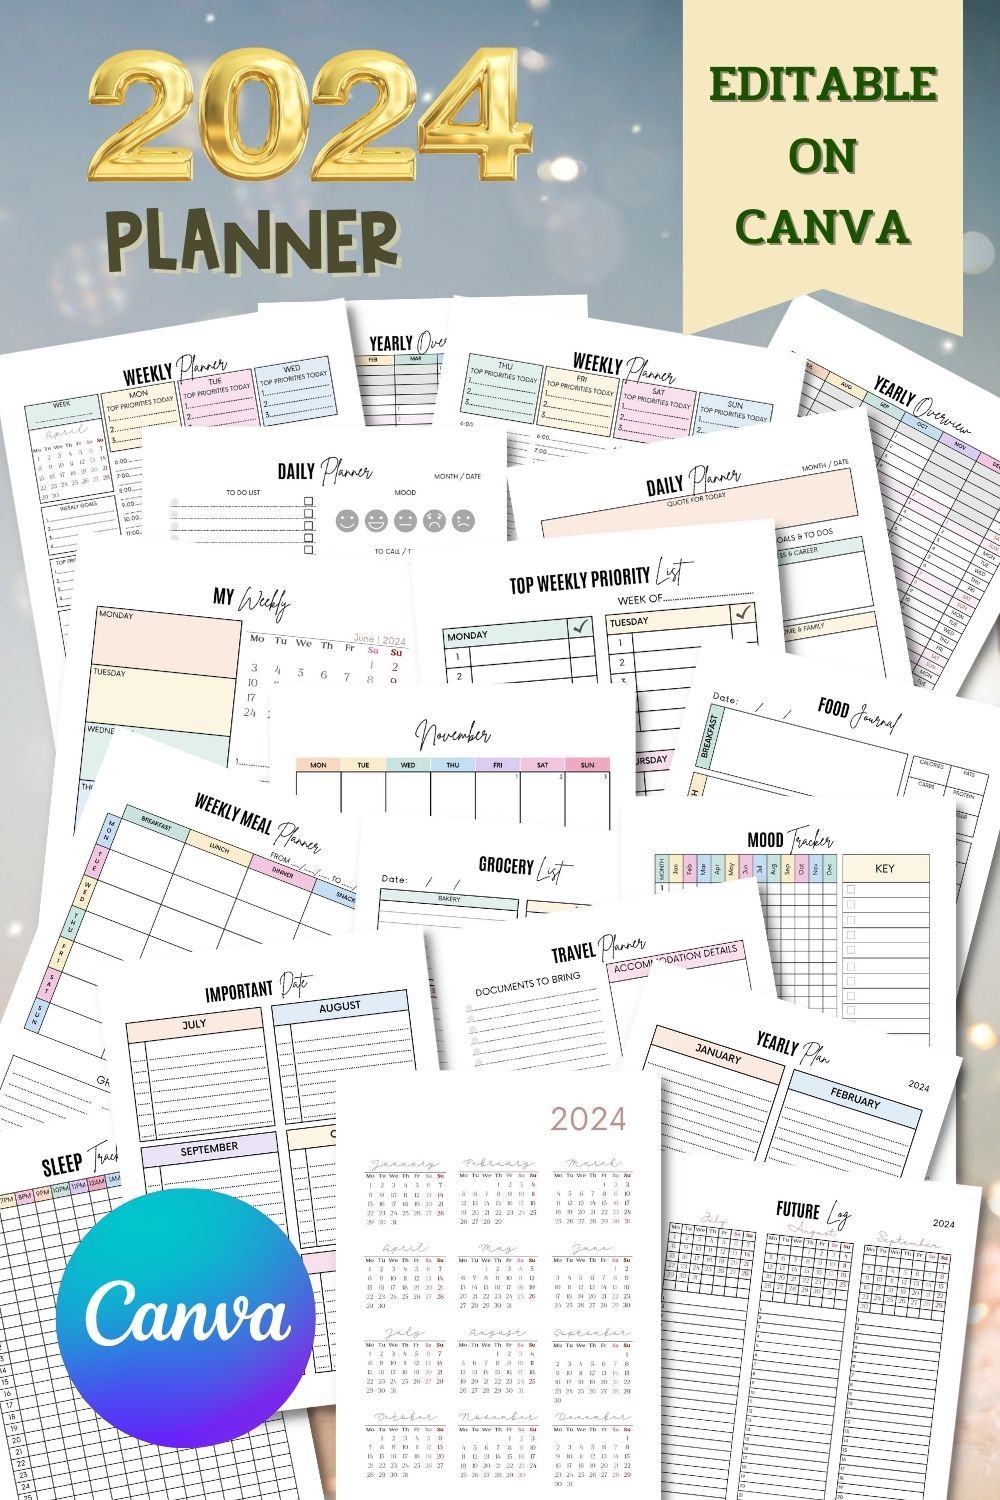 CANVA 2023 Planner Templates pinterest preview image.